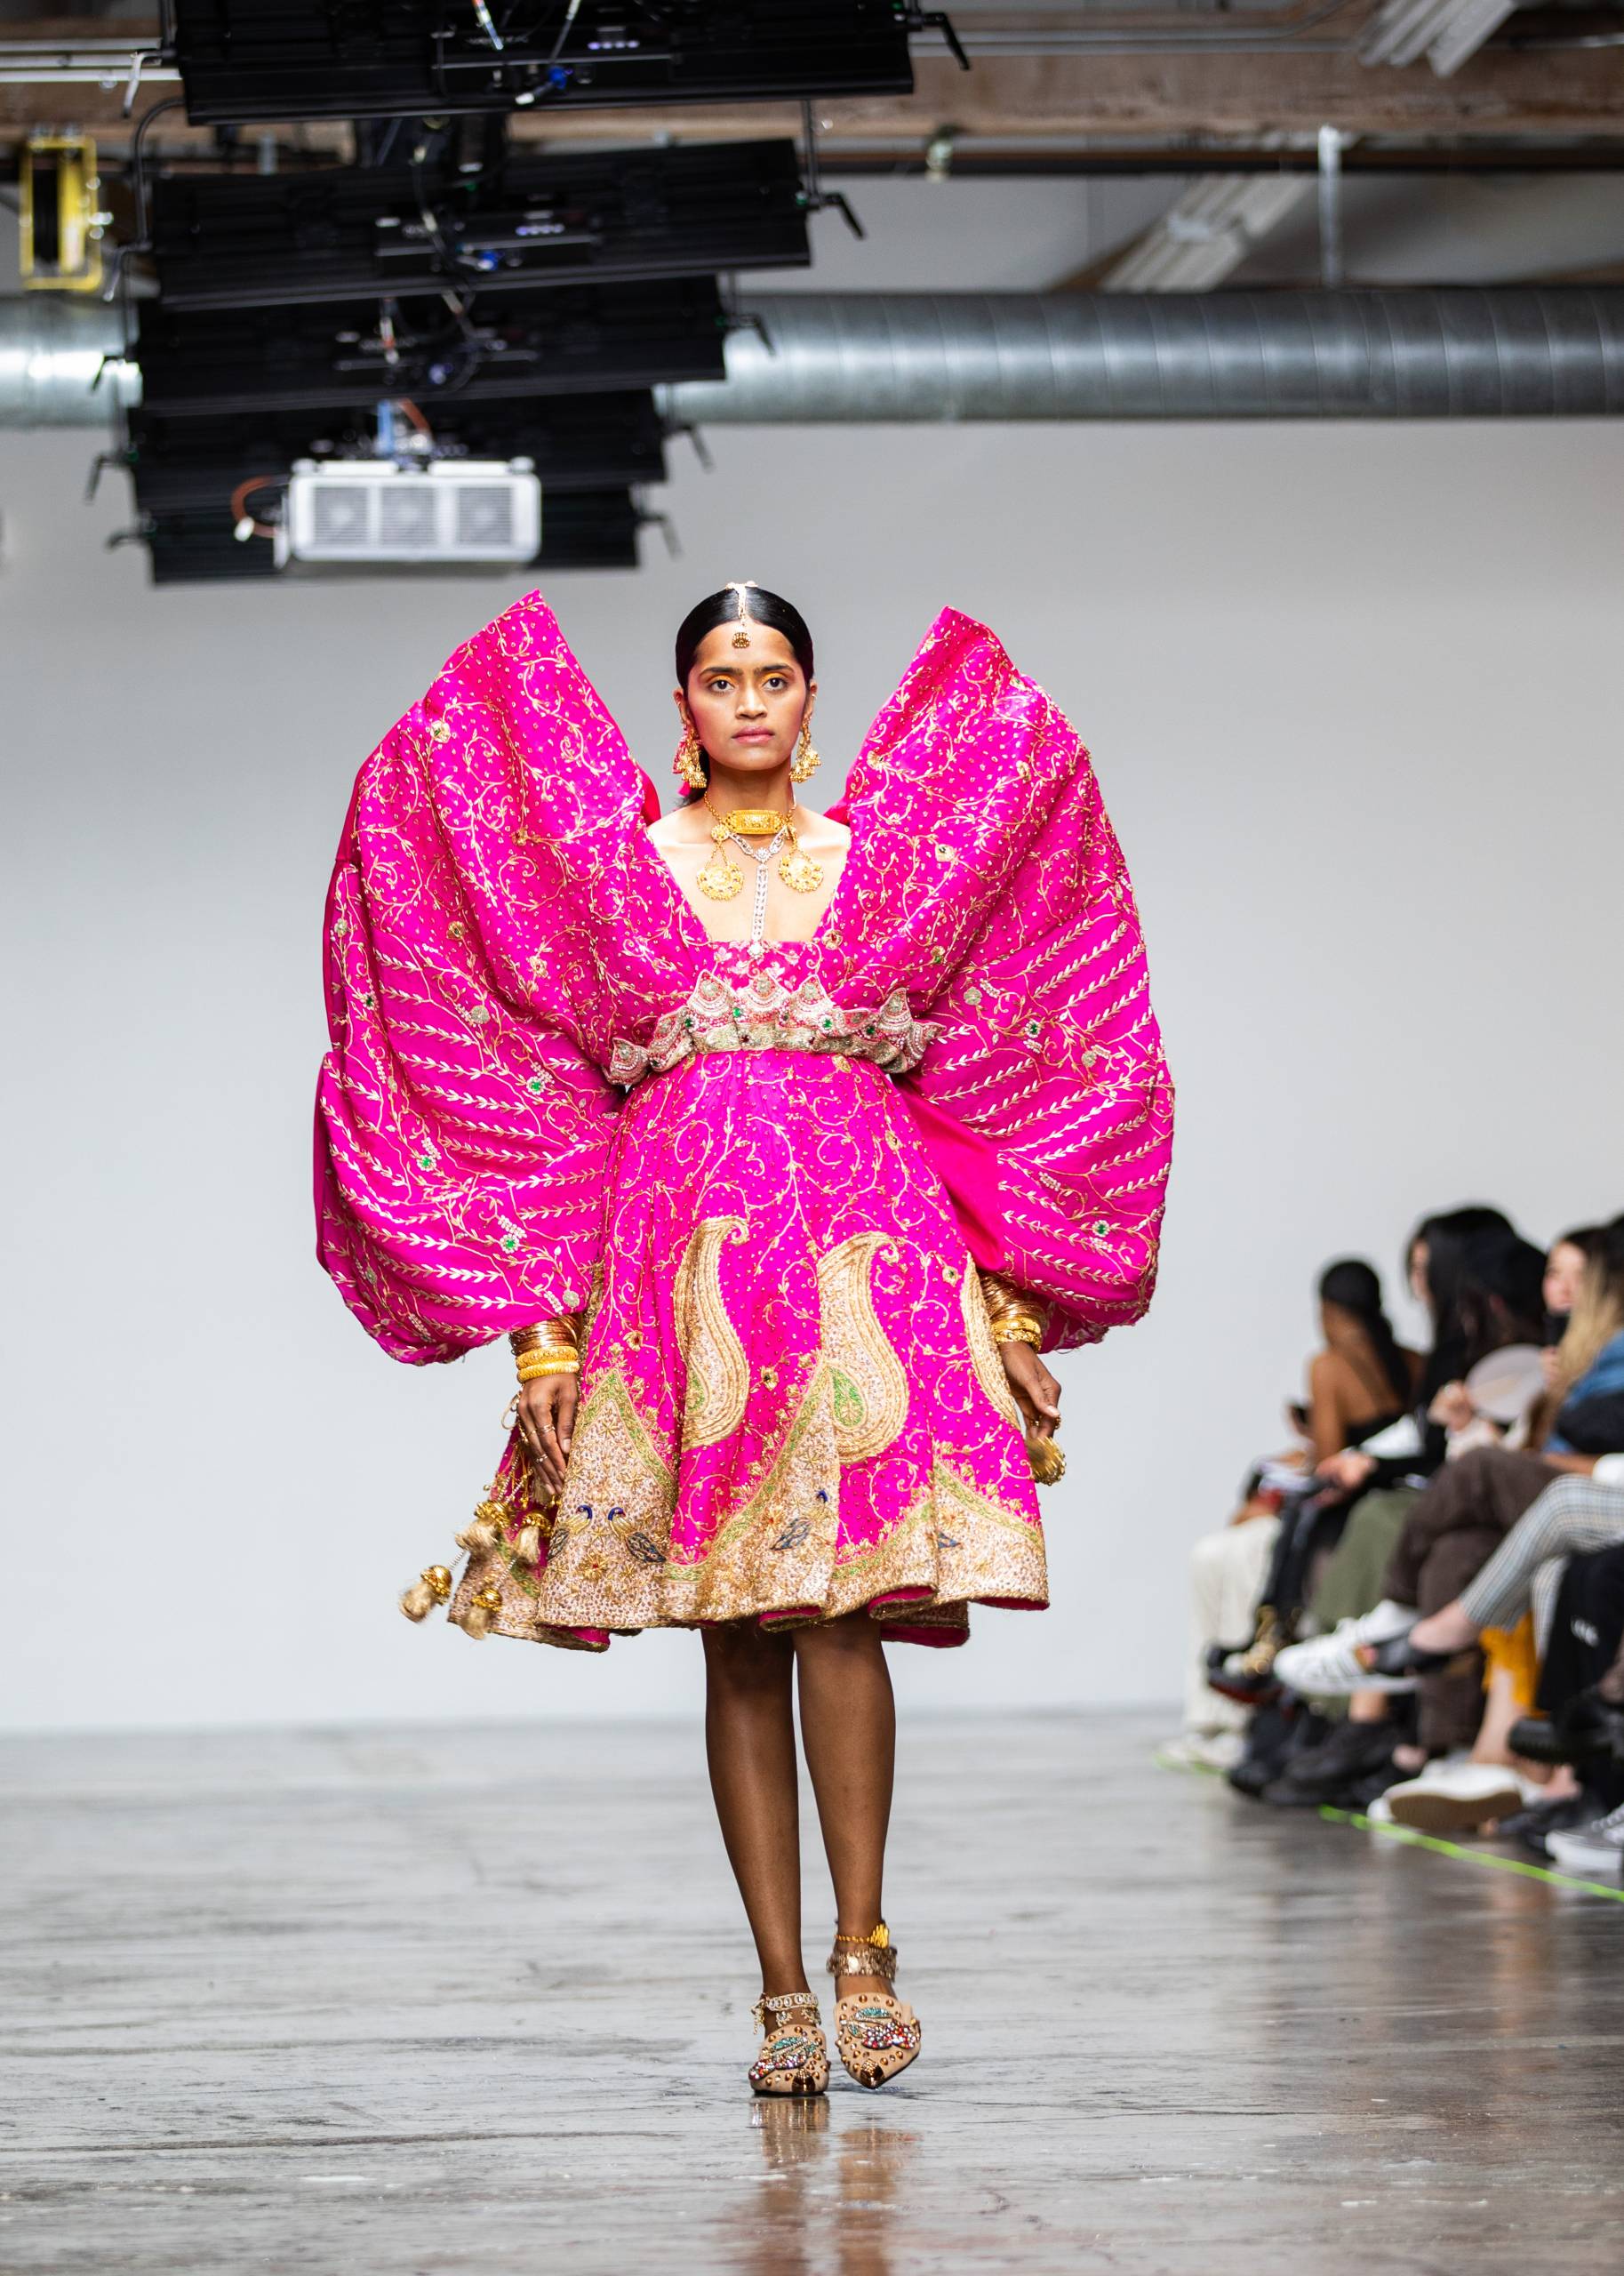 model in bright pink dress with giant sleeves and gold detailing